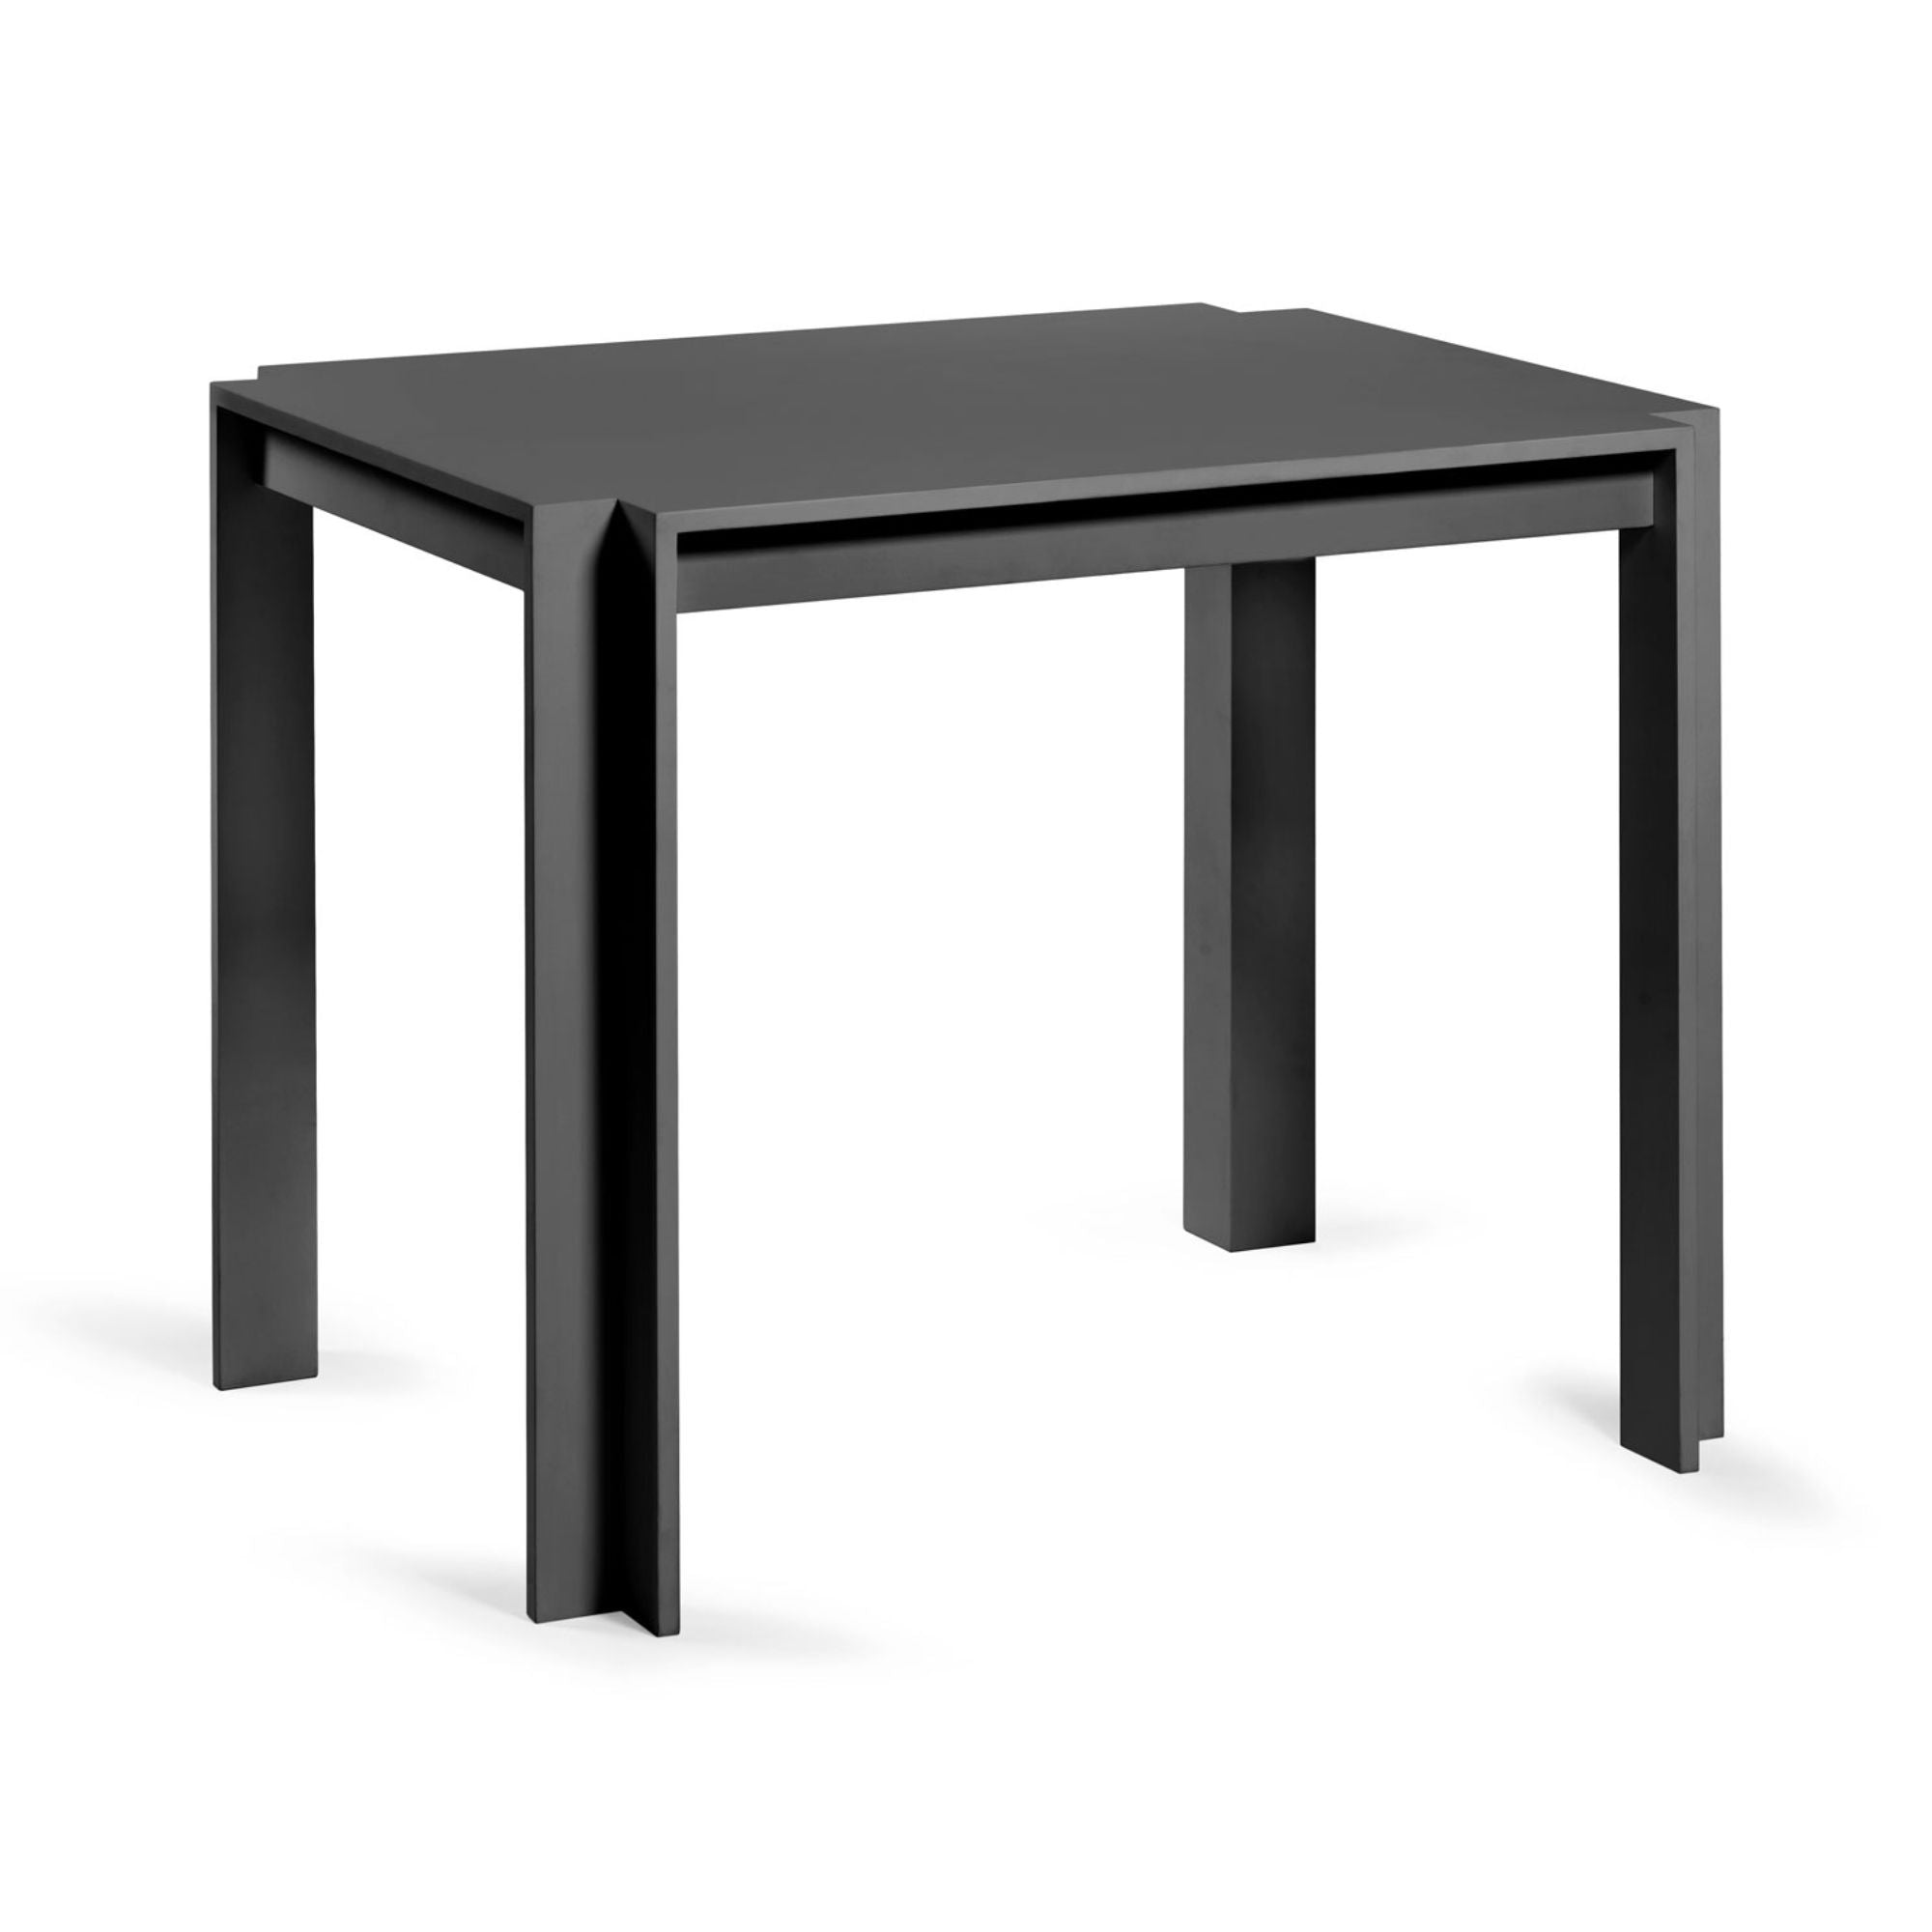 Cora Table Dining Table Ann Demeulemeester